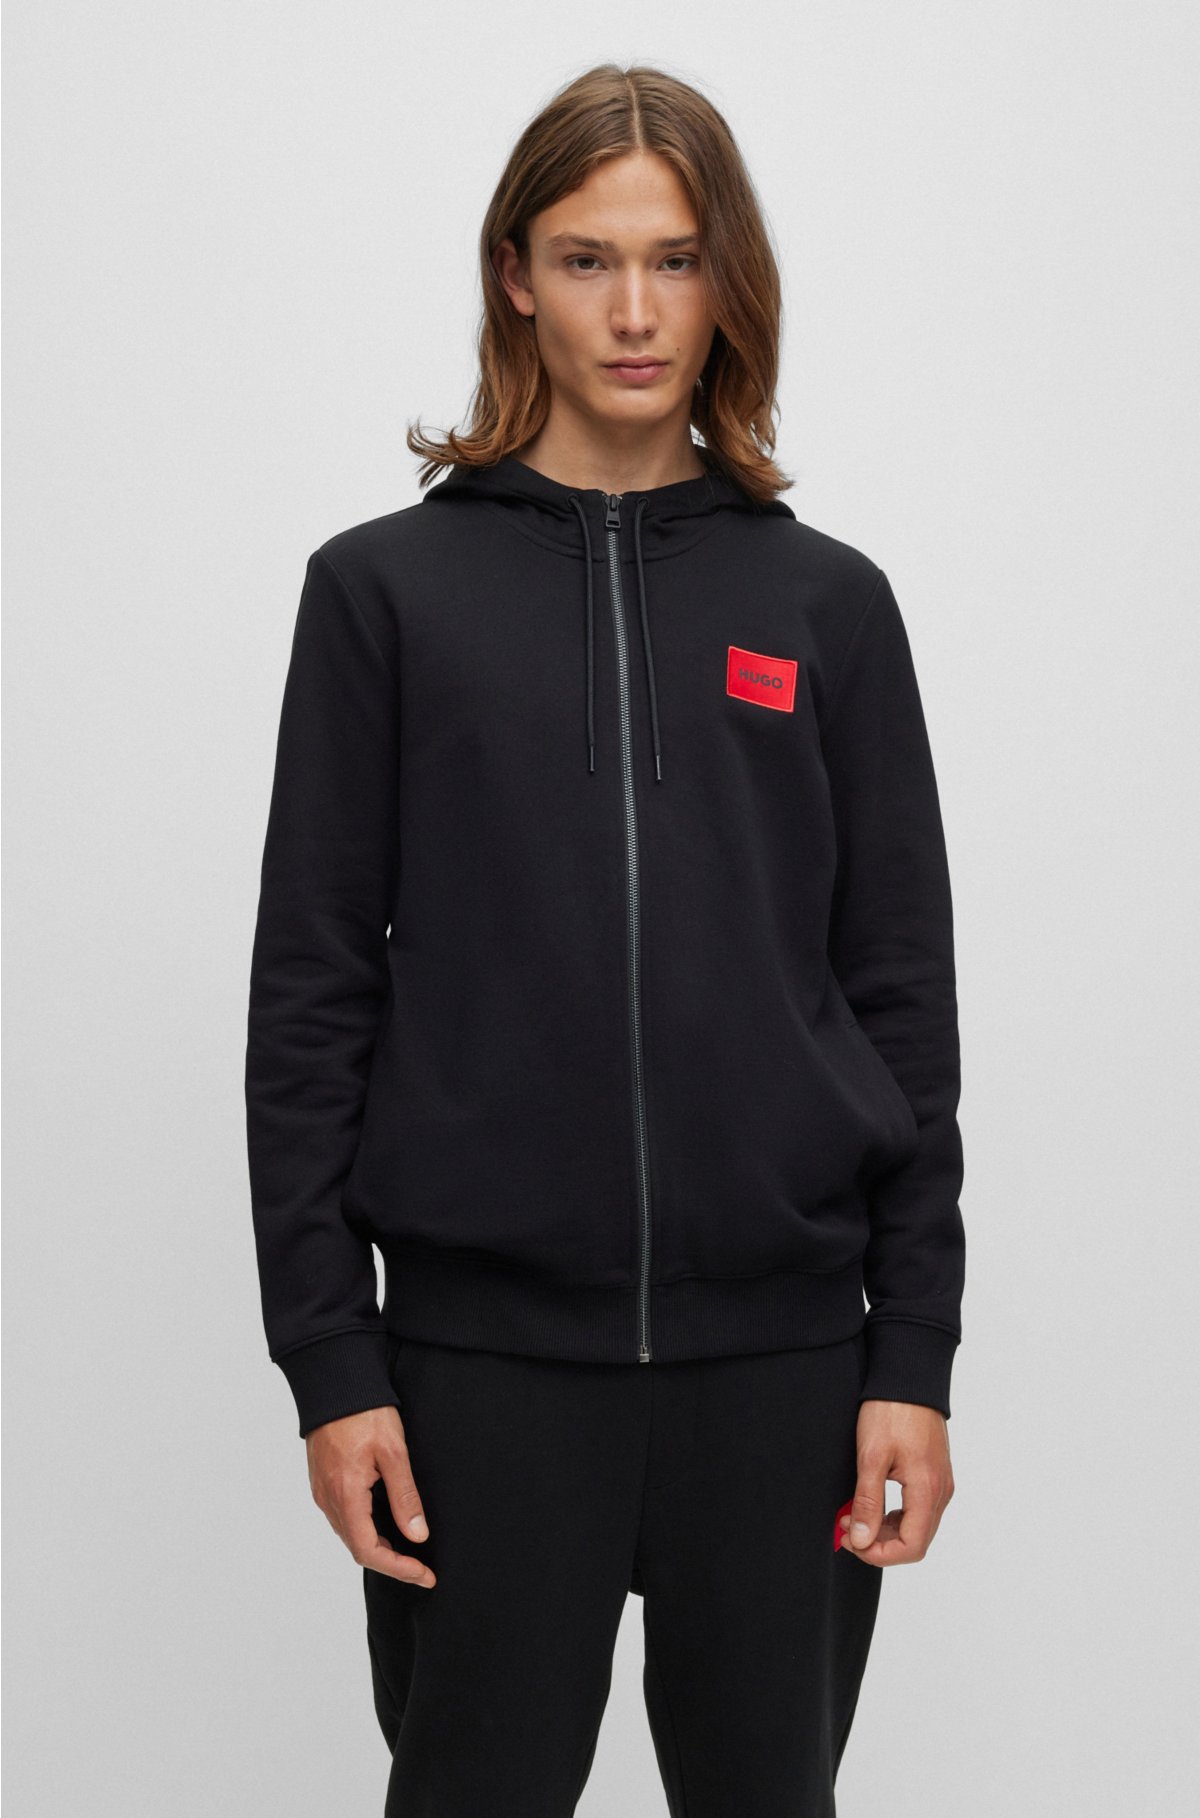 HUGO - Regular-fit hoodie in logo French terry with label